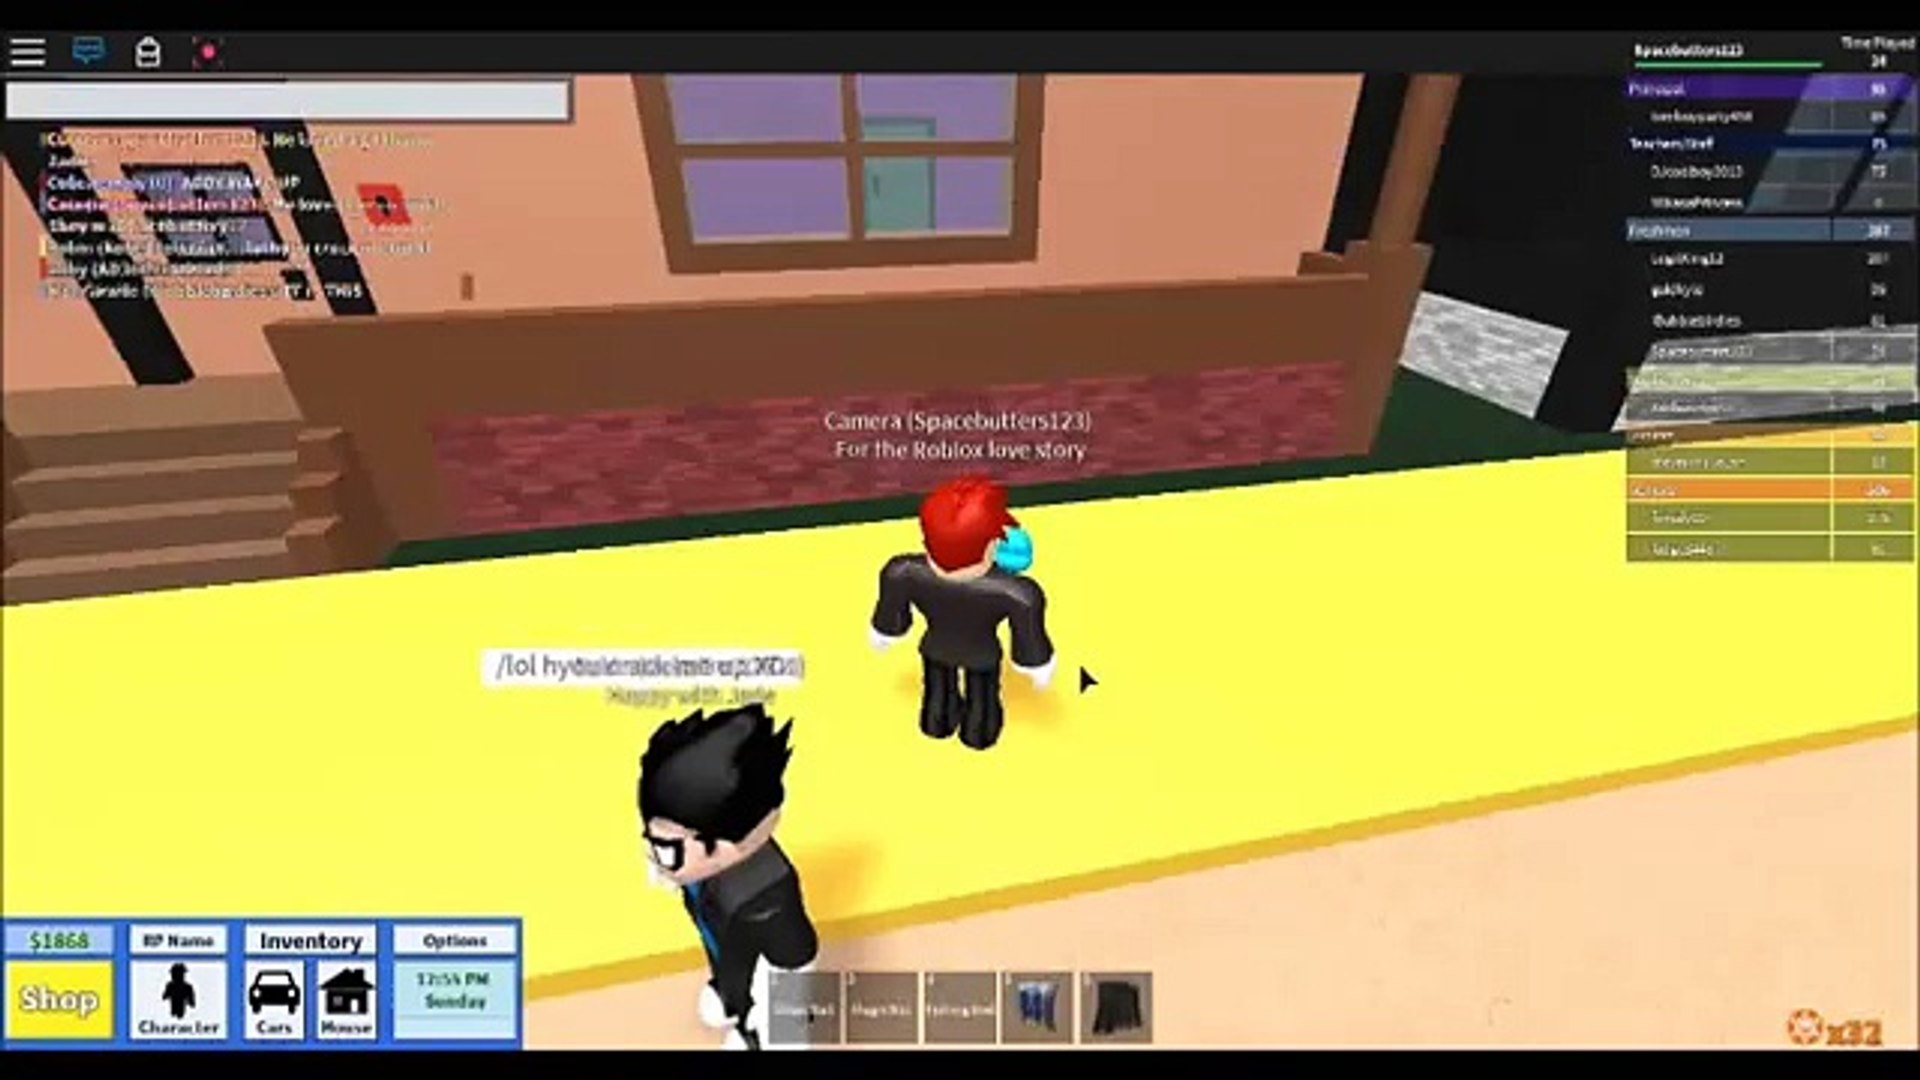 A Roblox Bully Love Story